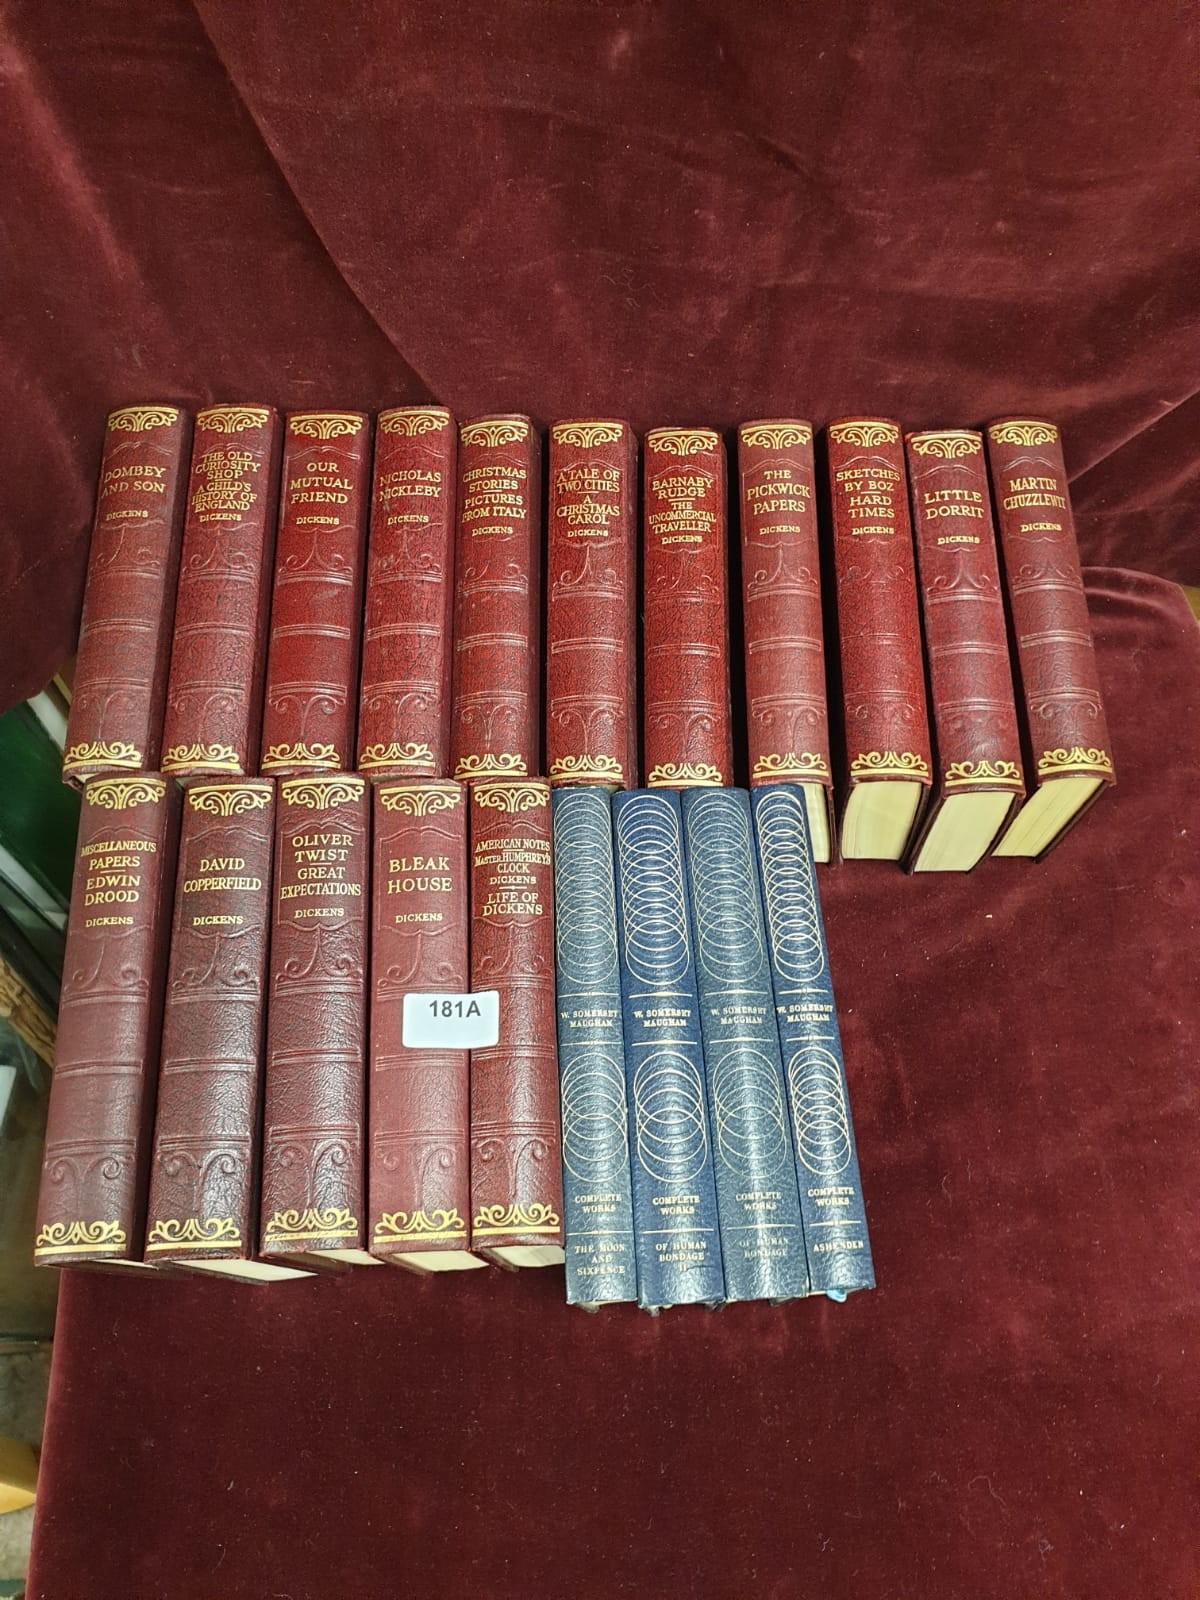 Large section of Charles dickinson works together with w. Somerset Maughan complete works books..